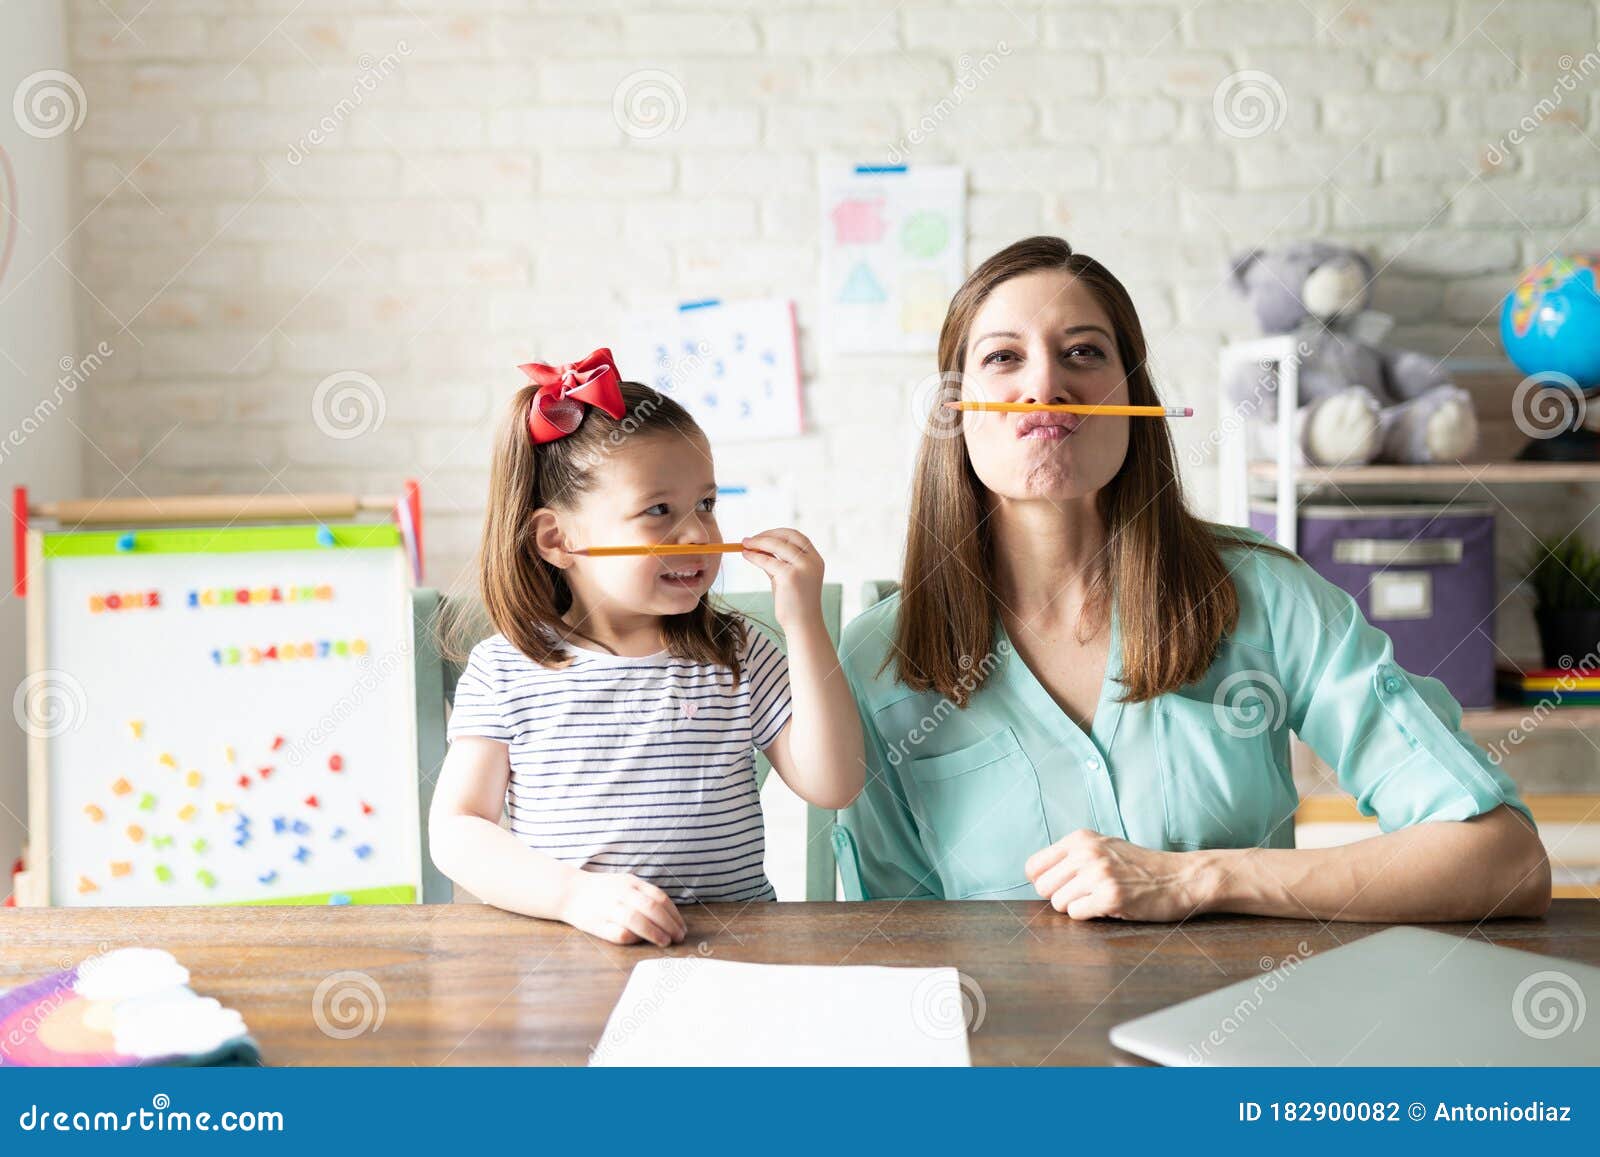 mother and daughter enjoying homeschooling together